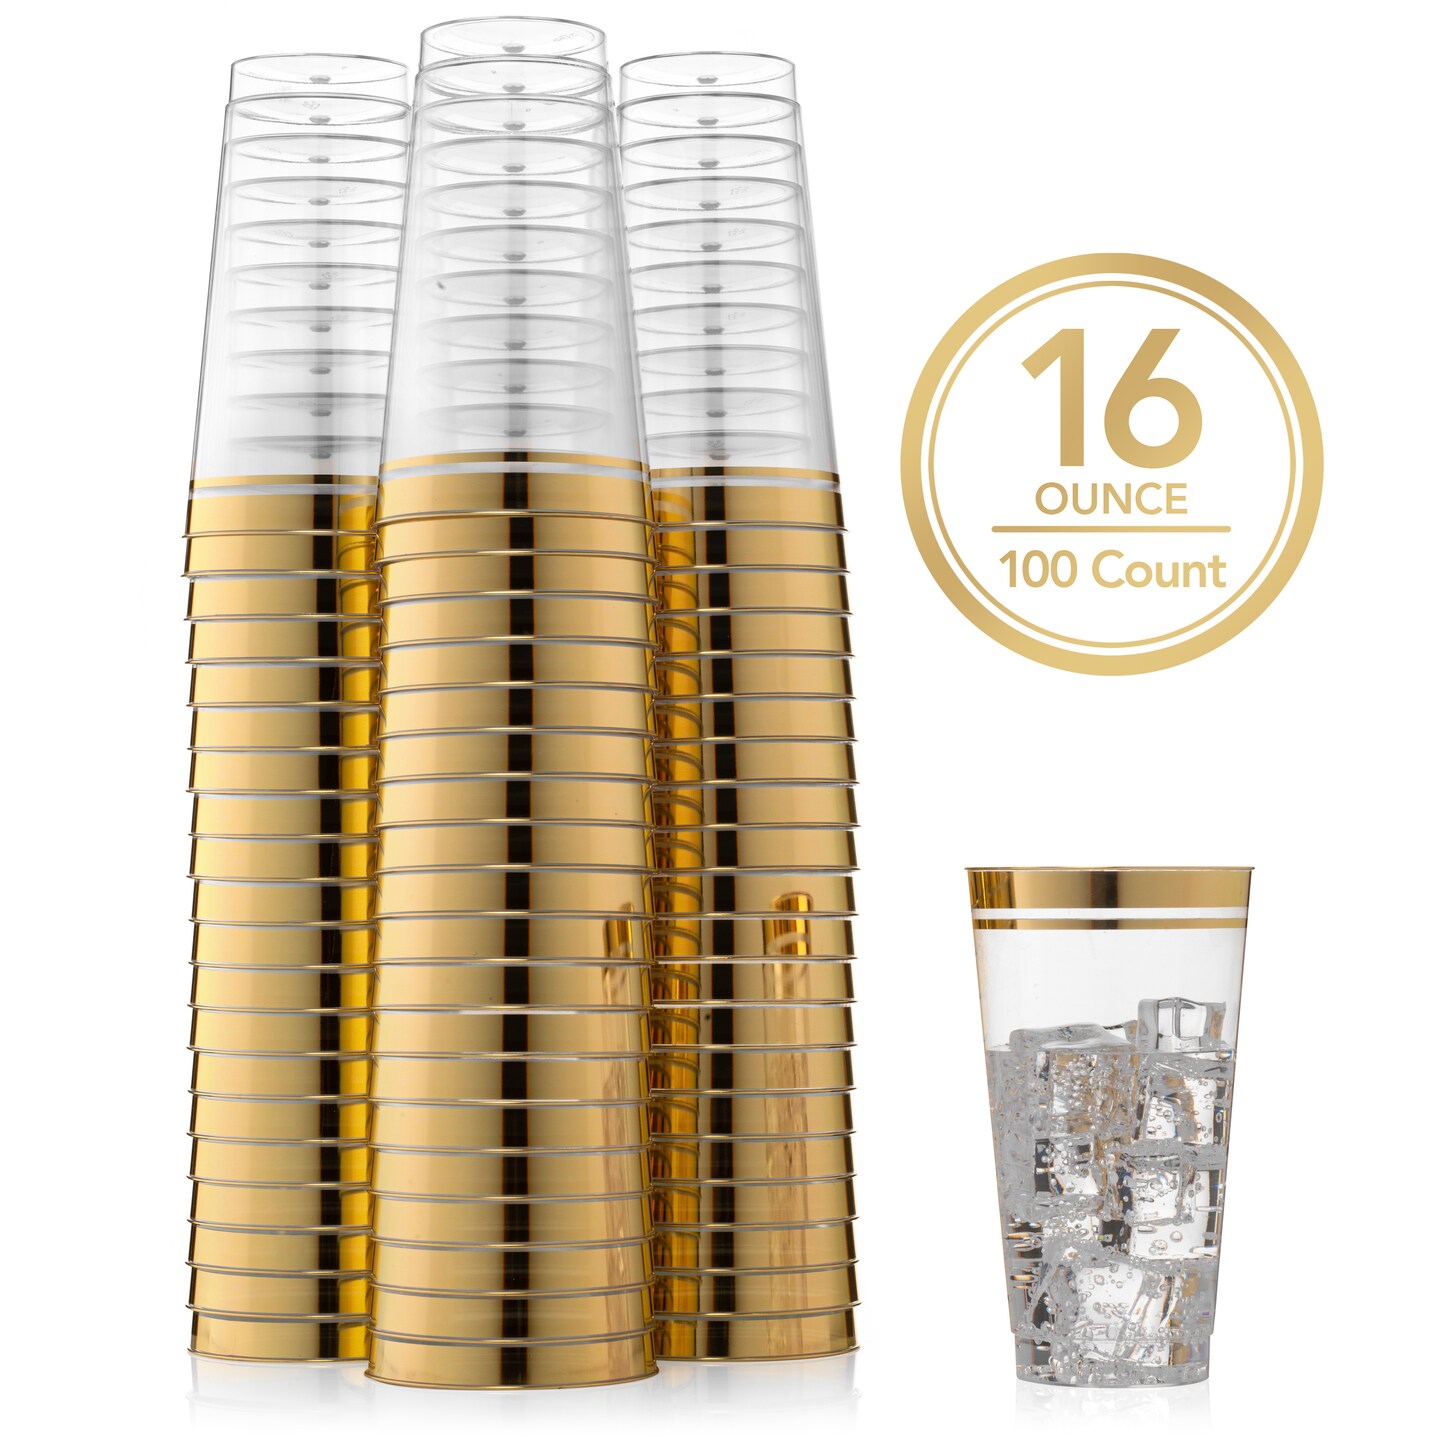 100 Pk 16 oz Clear Plastic Cups, Gold Rimmed Disposable Cups